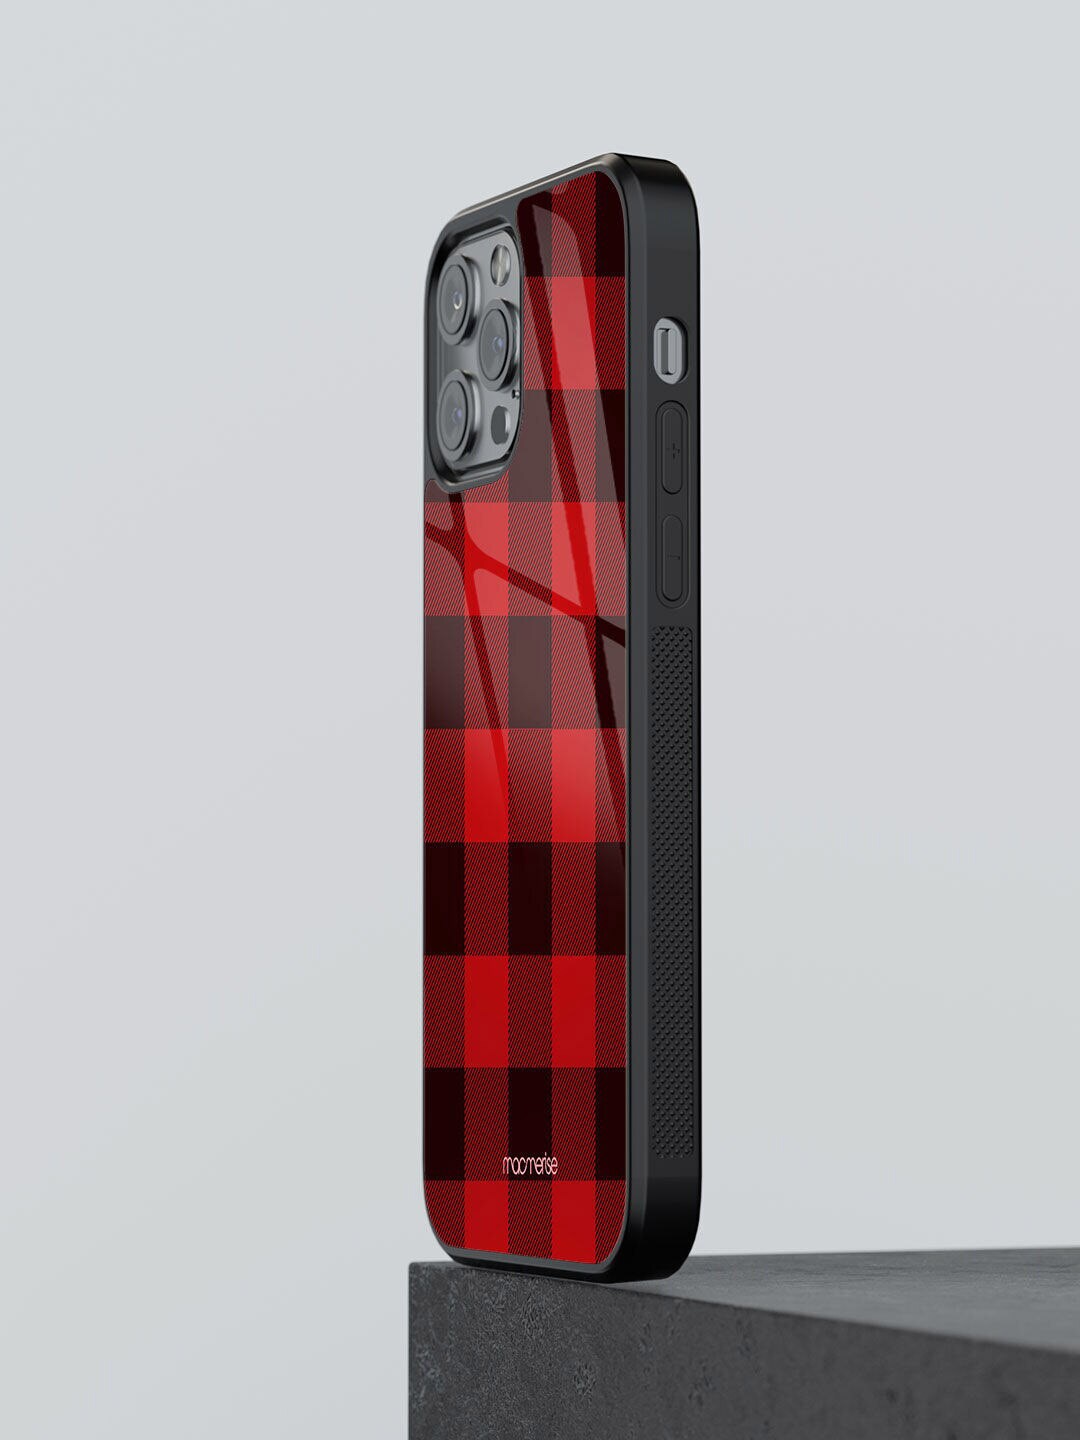 macmerise Red Printed Glass iPhone 12 Pro Max Back Case Price in India